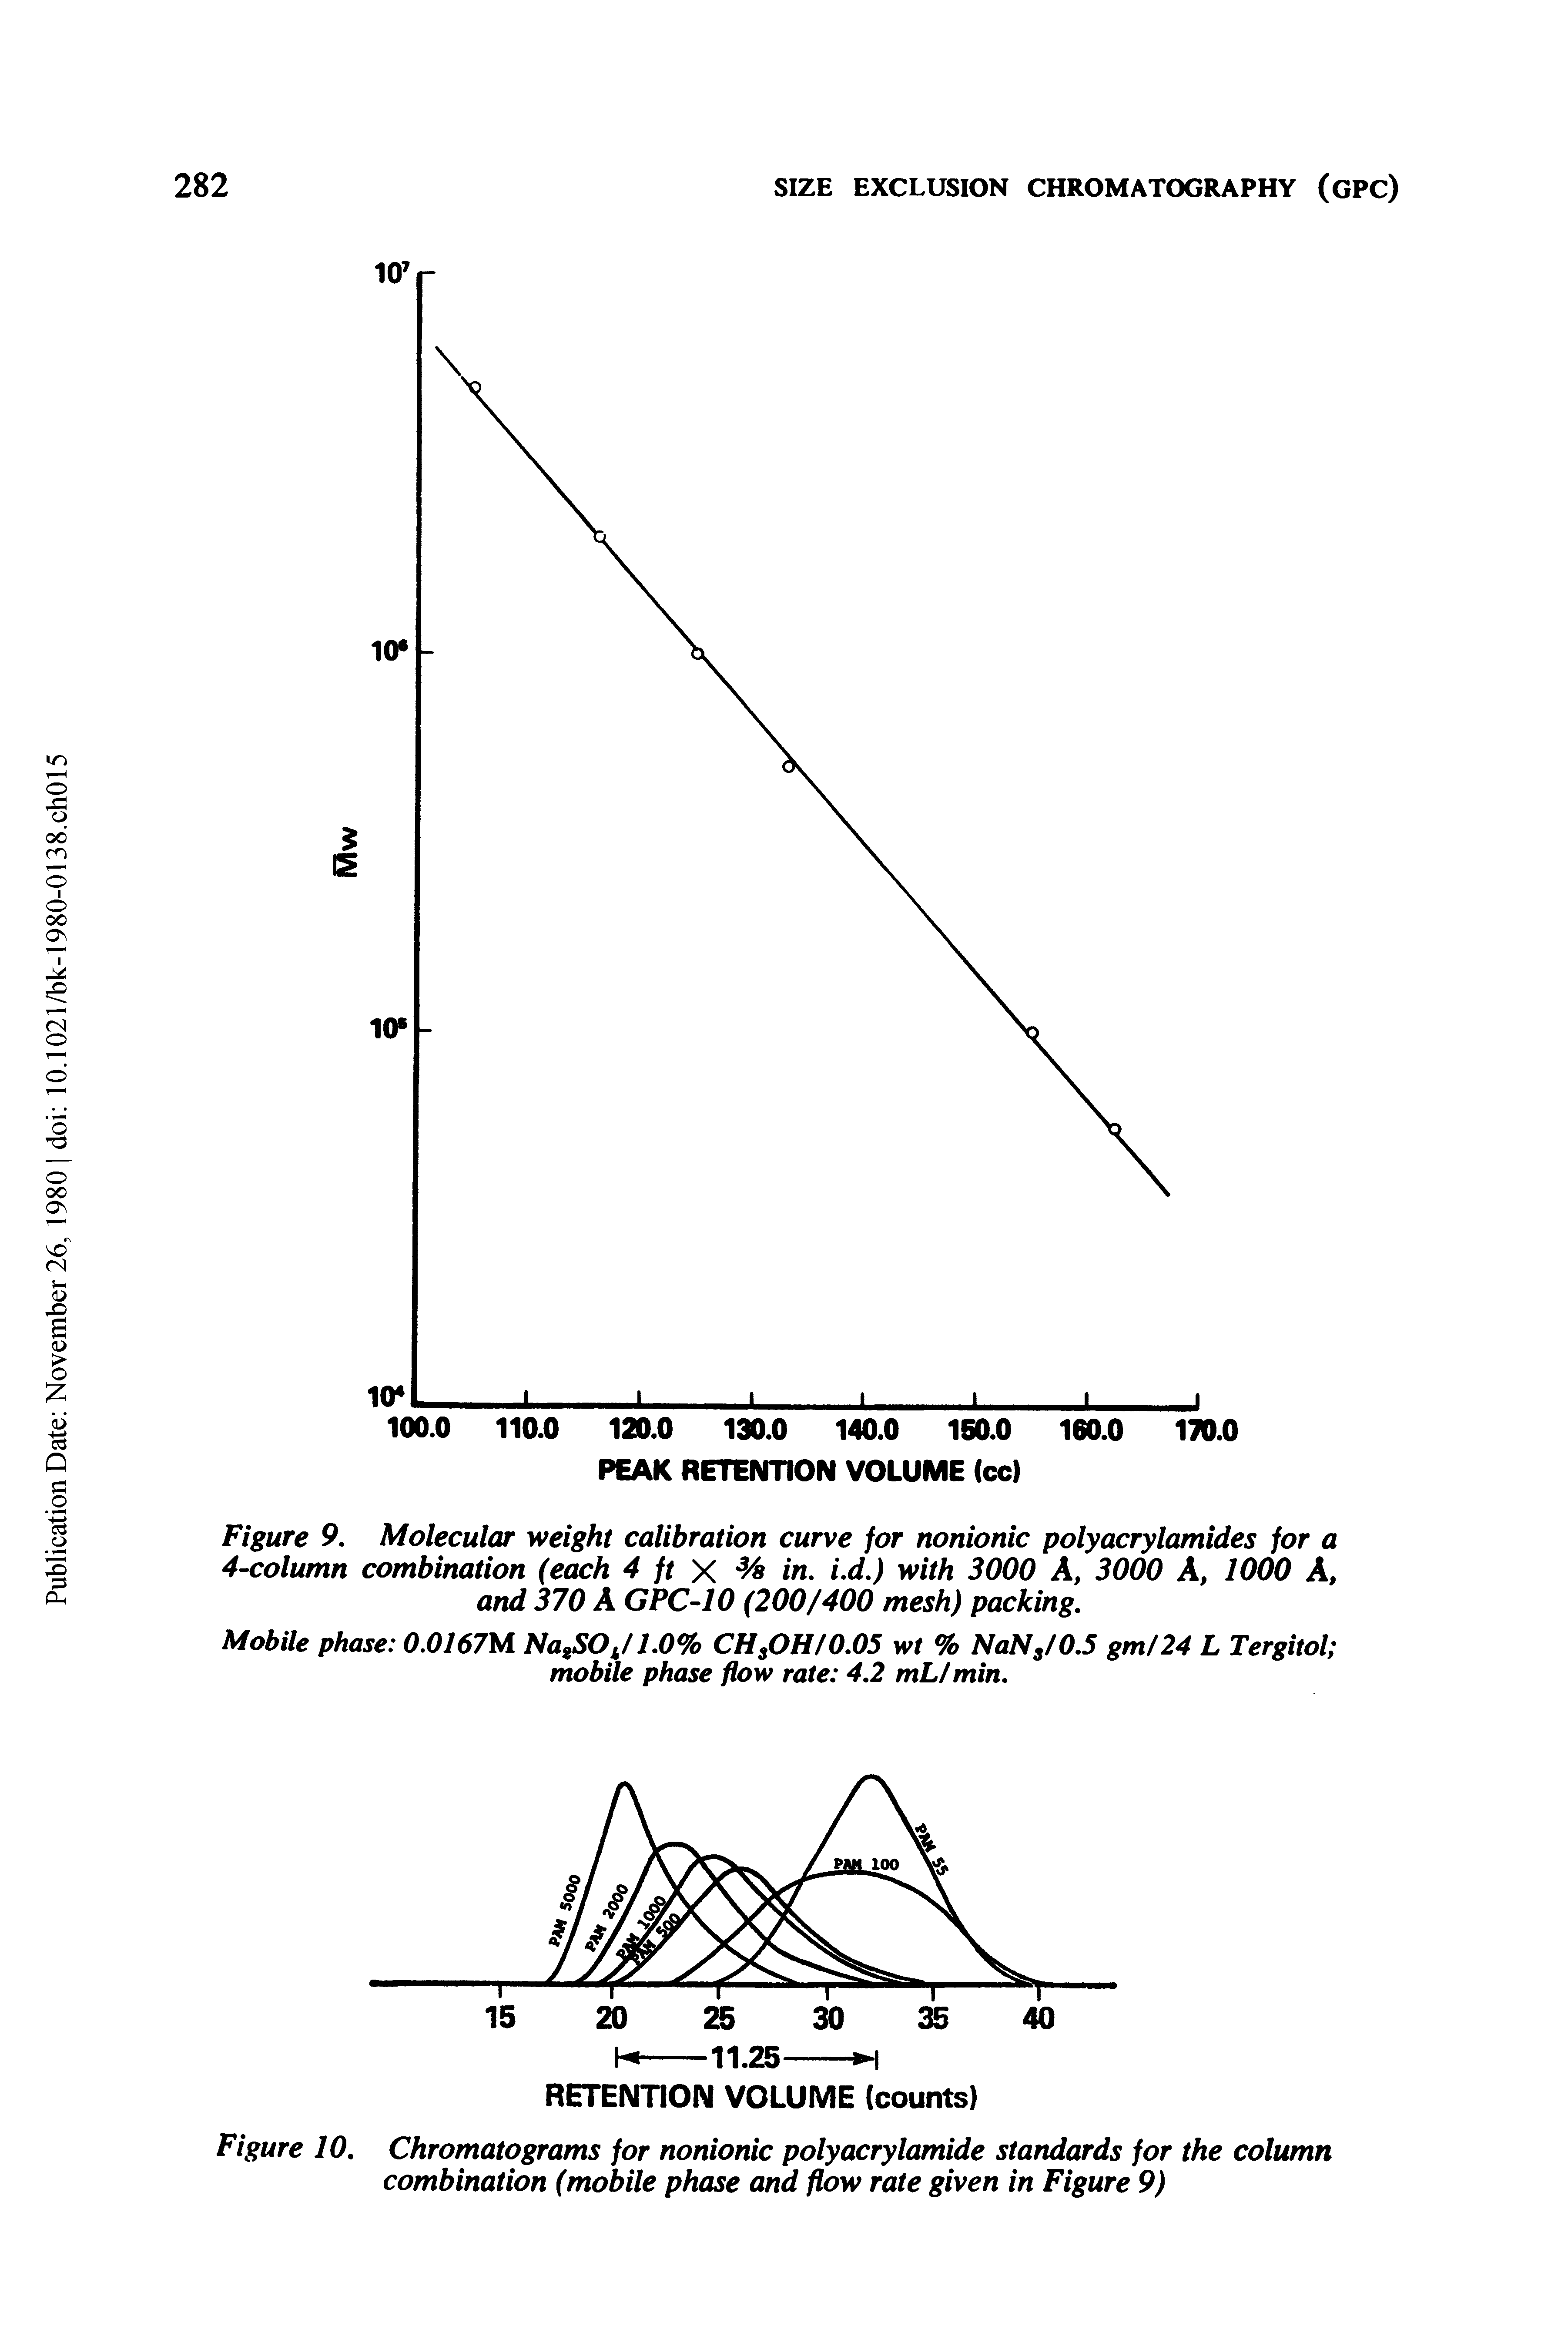 Figure 10. Chromatograms for nonionic polyacrylamide staruiards for the column combination (mobile phase and flow rate given in Figure 9)...